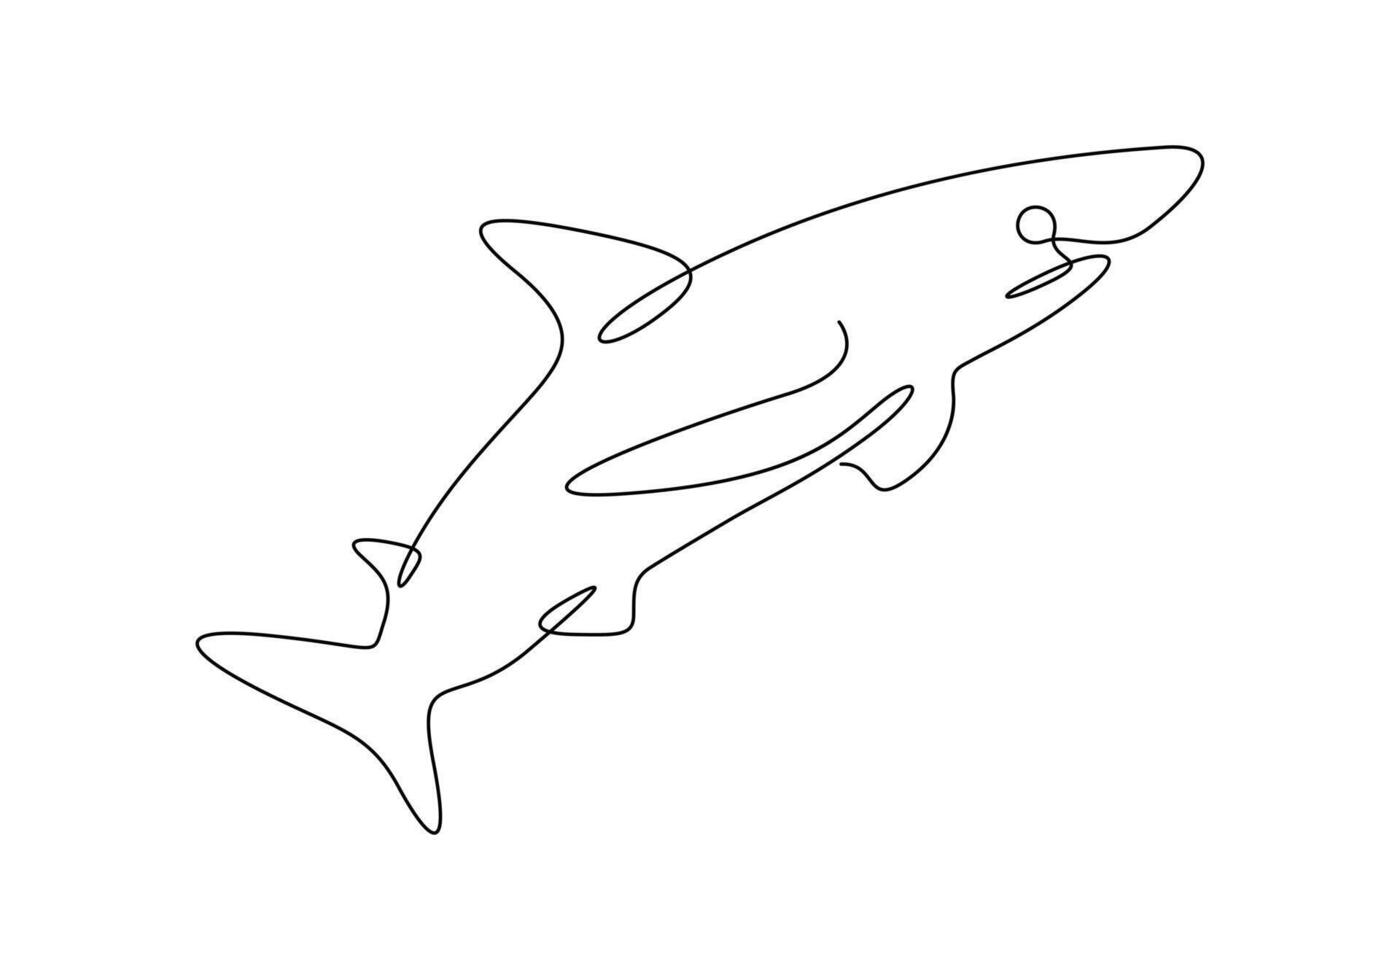 Shark fish in one continuous line drawing digital illustration vector